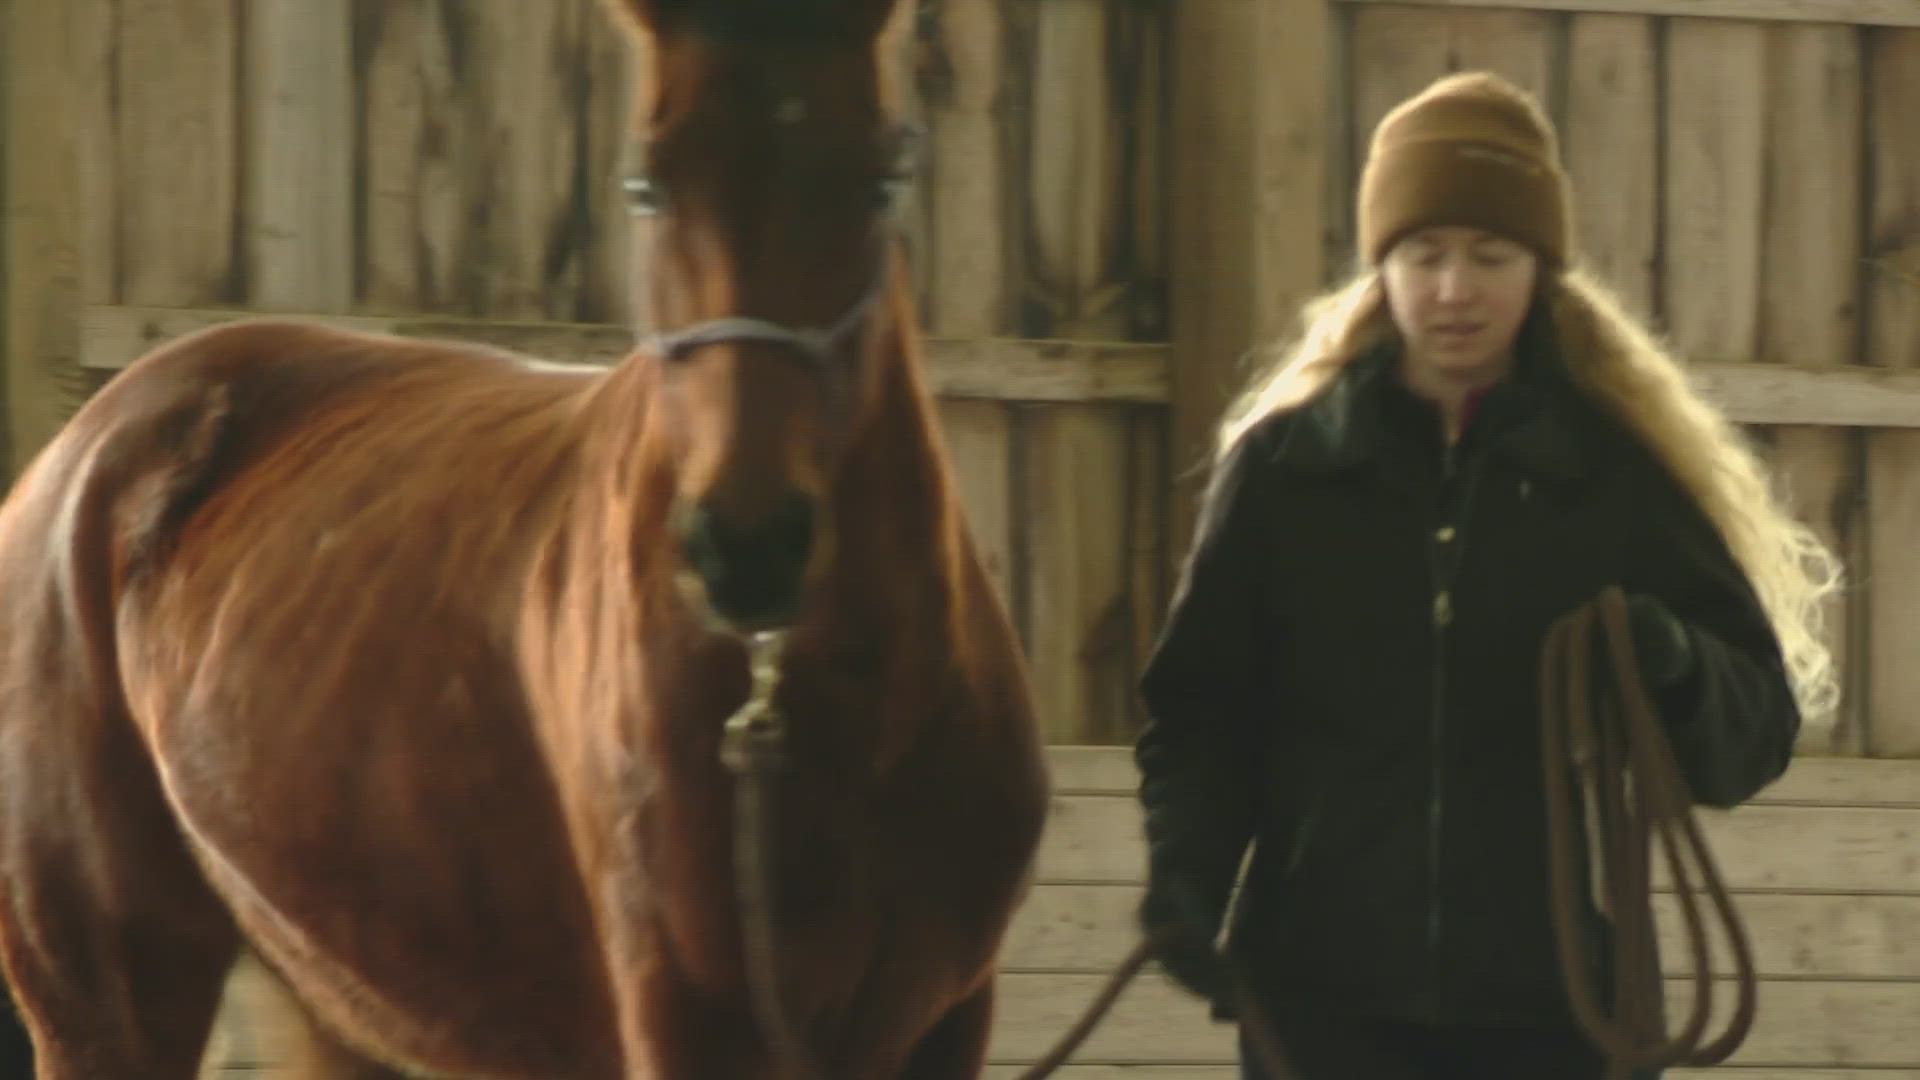 Meaghan Martin said she immediately recognized the branding when the horse, Saxy, popped up on social media and knew she had to save her from being euthanized.